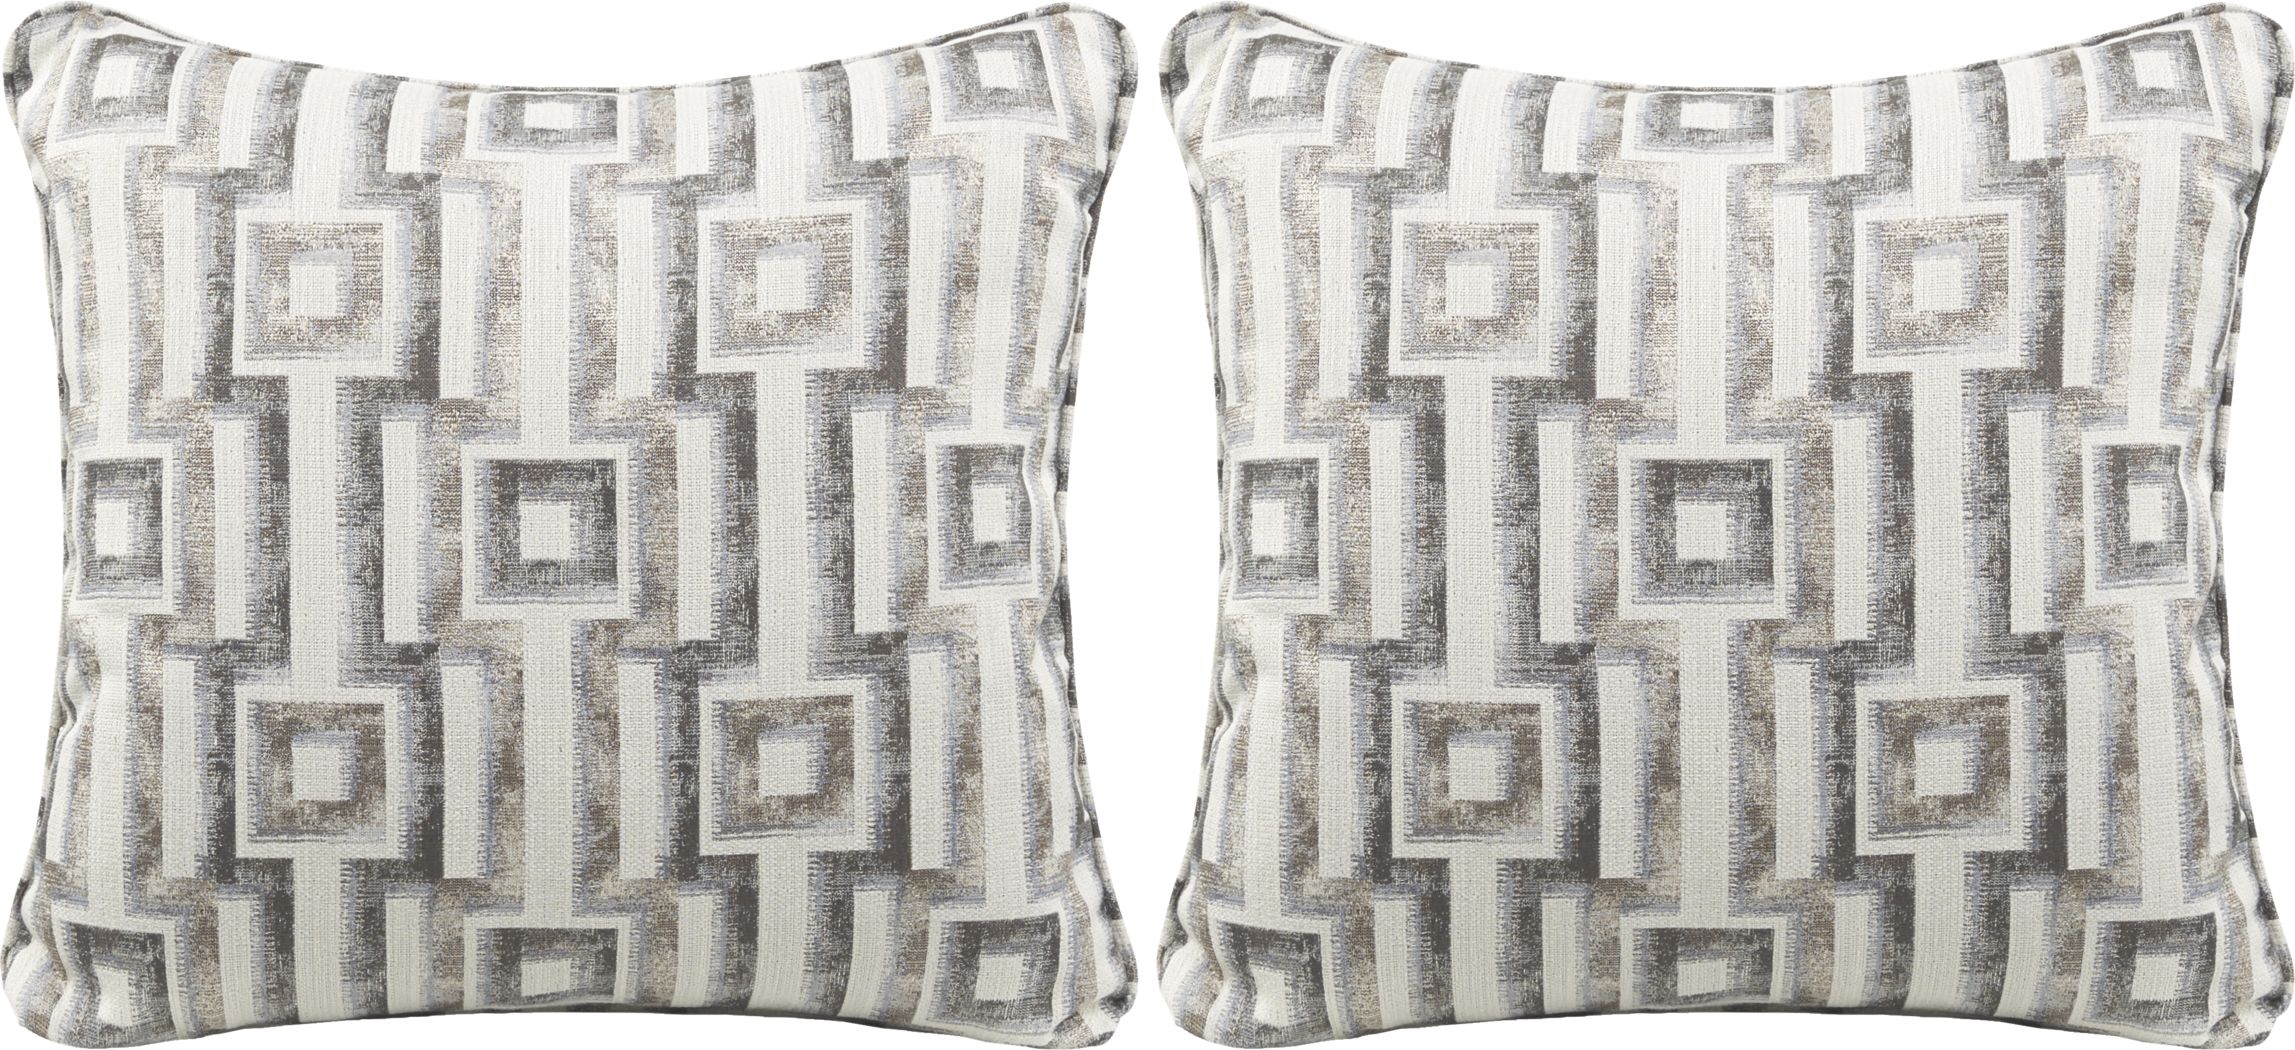 Pegasus Home Fashions Bling Decorative Pillows 2 Pack Beige 